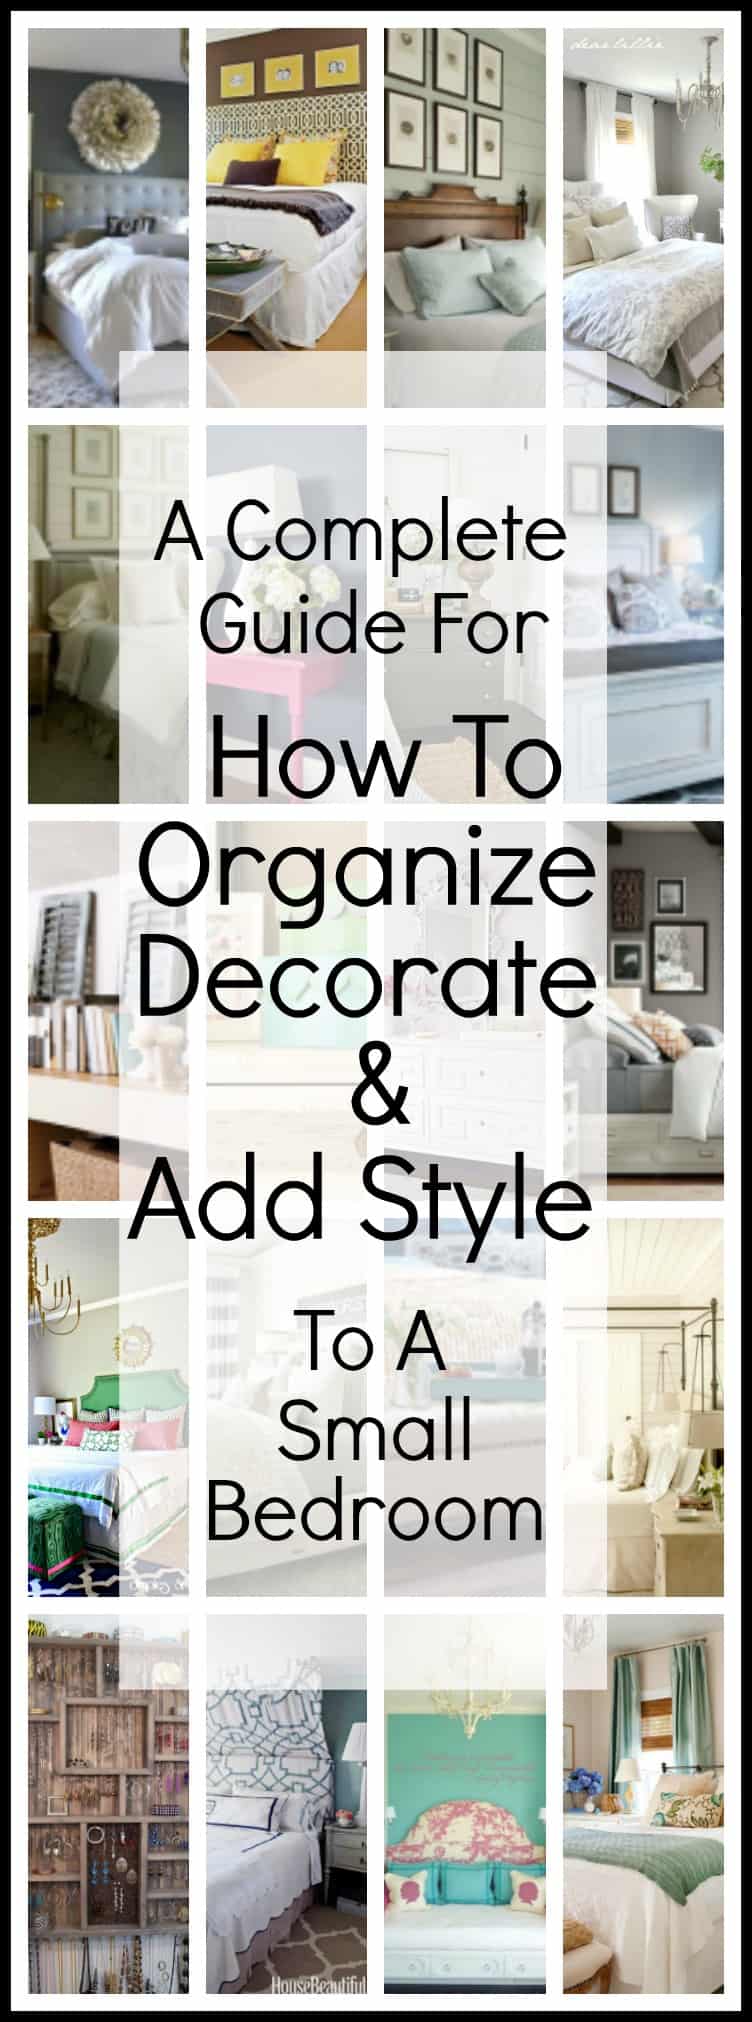 Find loads of tips in this comprehensive guide for how to organize, decorate and add style to a small bedroom.